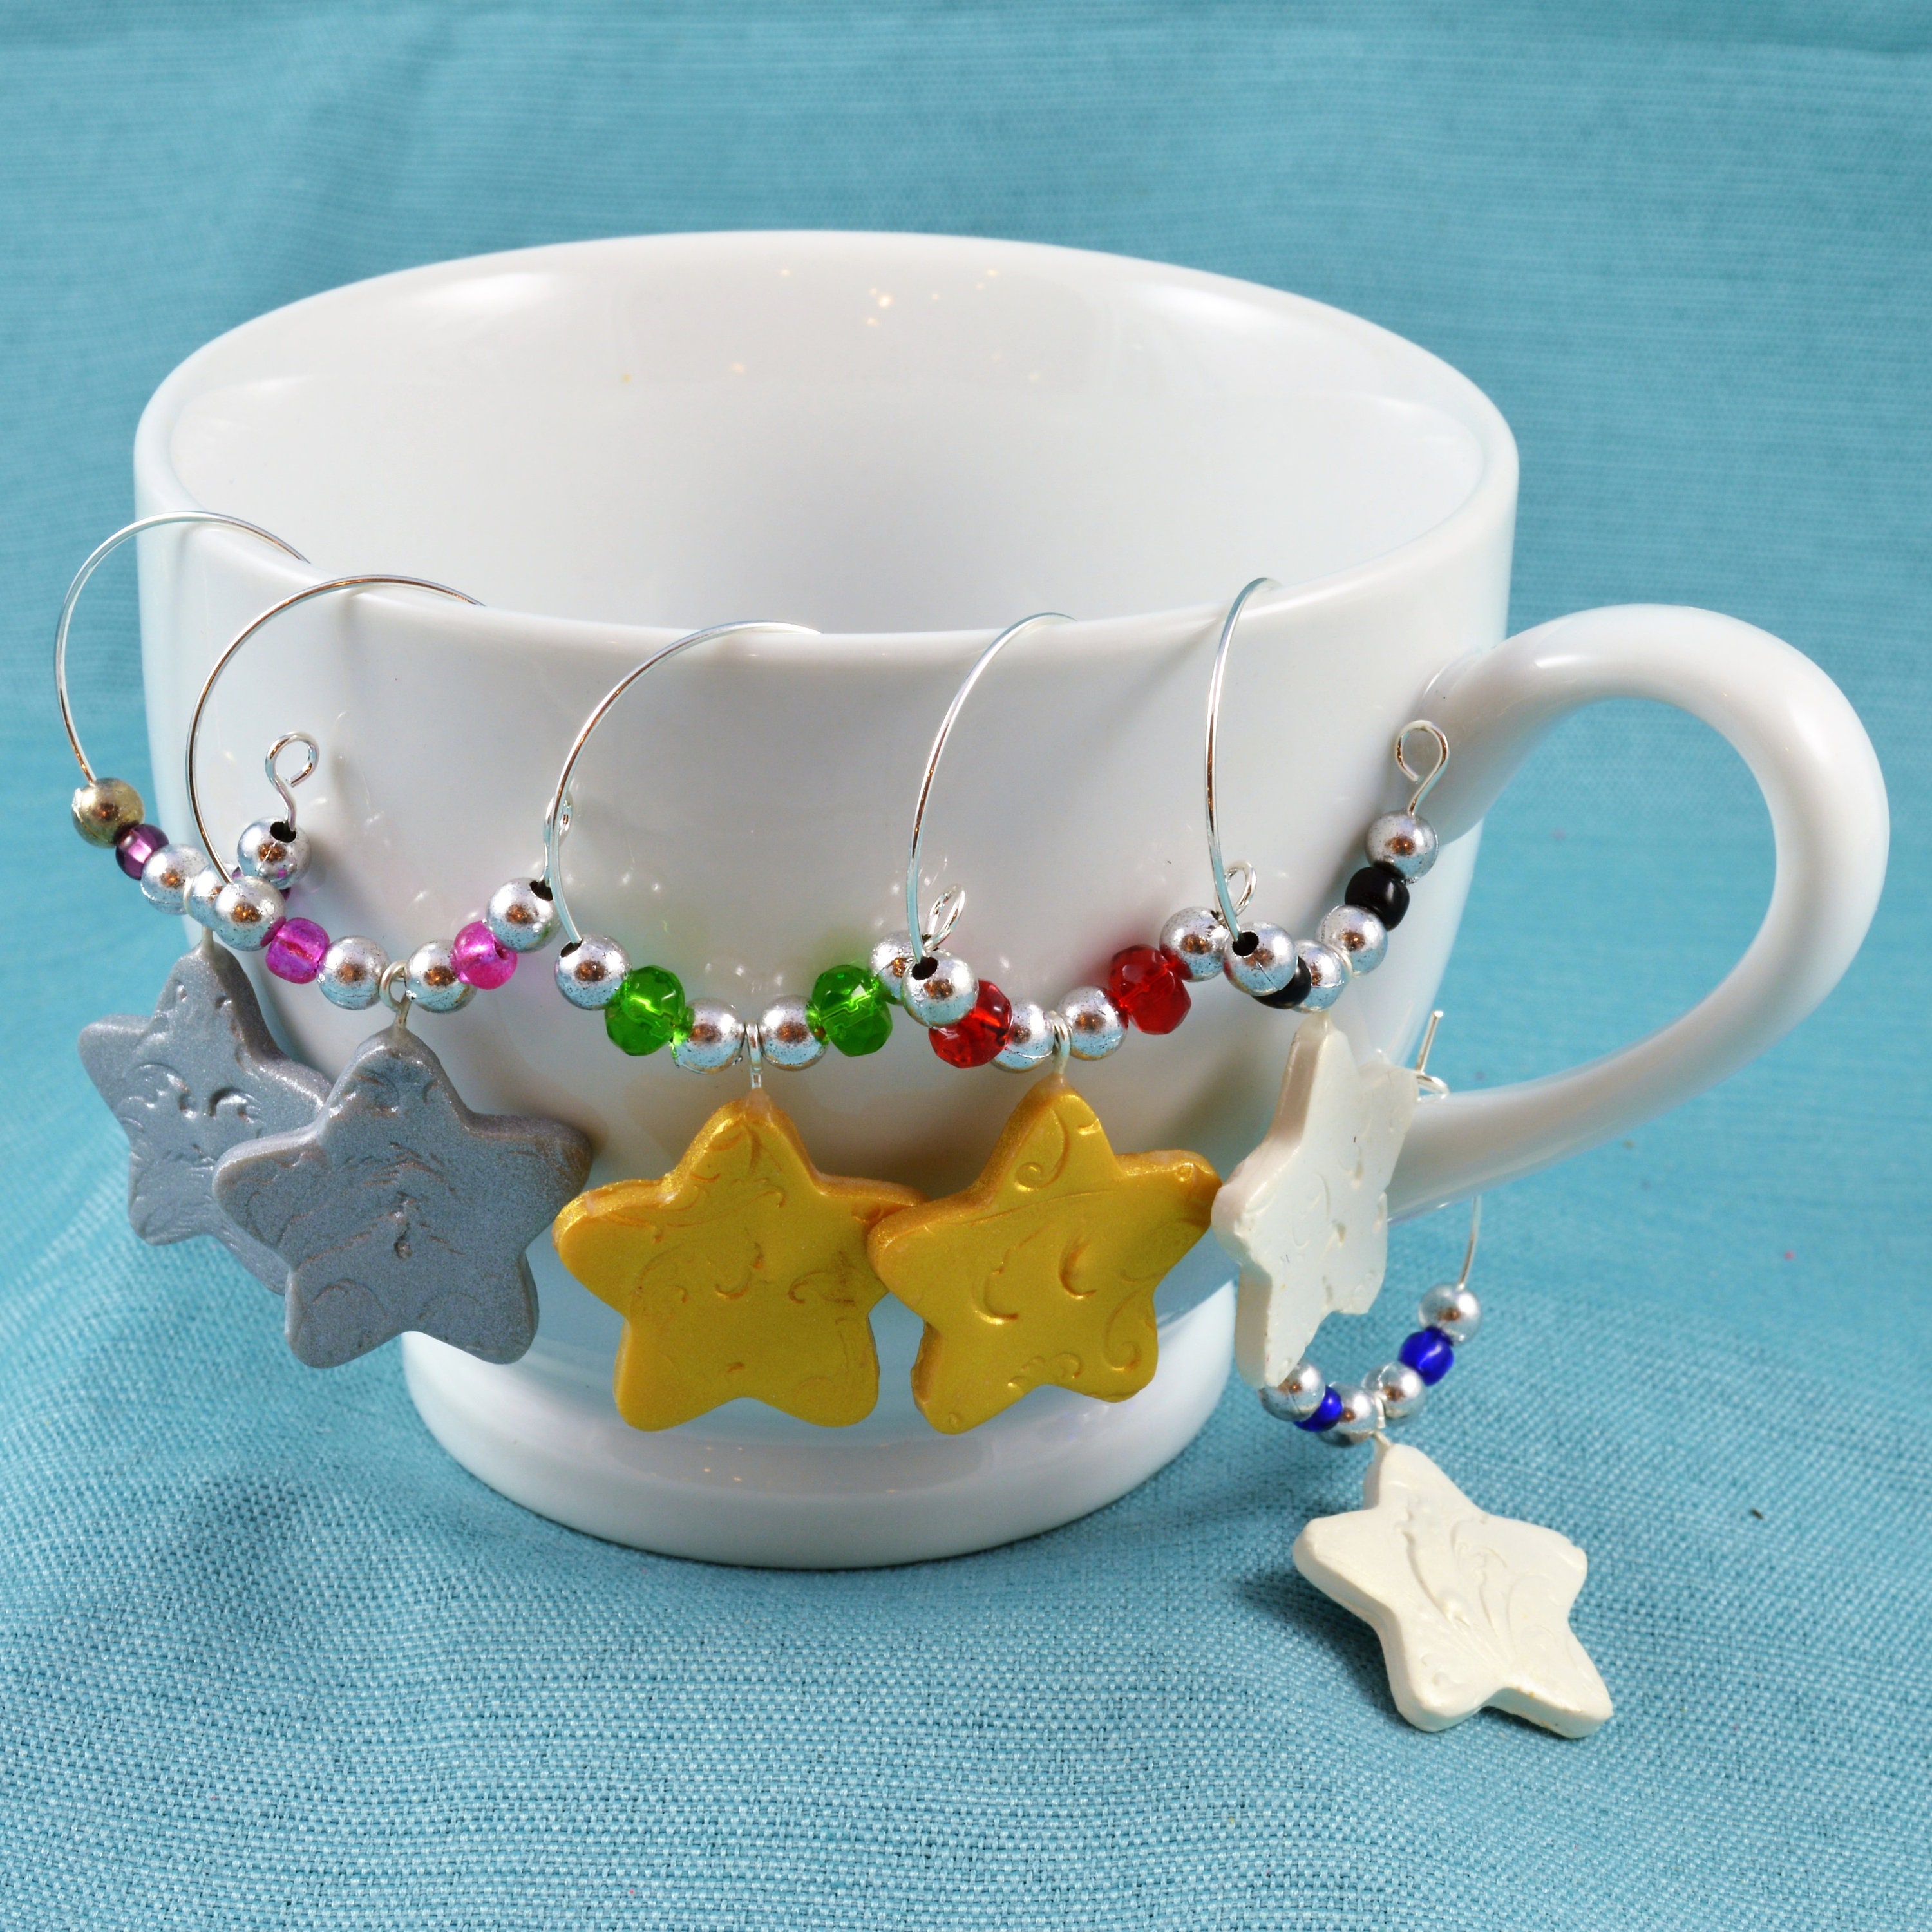 Star Wine Glass Charms, Coffee Mug Charms, Champagne or Tea Cup, Christmas,  Holiday, Hanukkah, Hostess Gift, Cocktails, New Year's Eve 